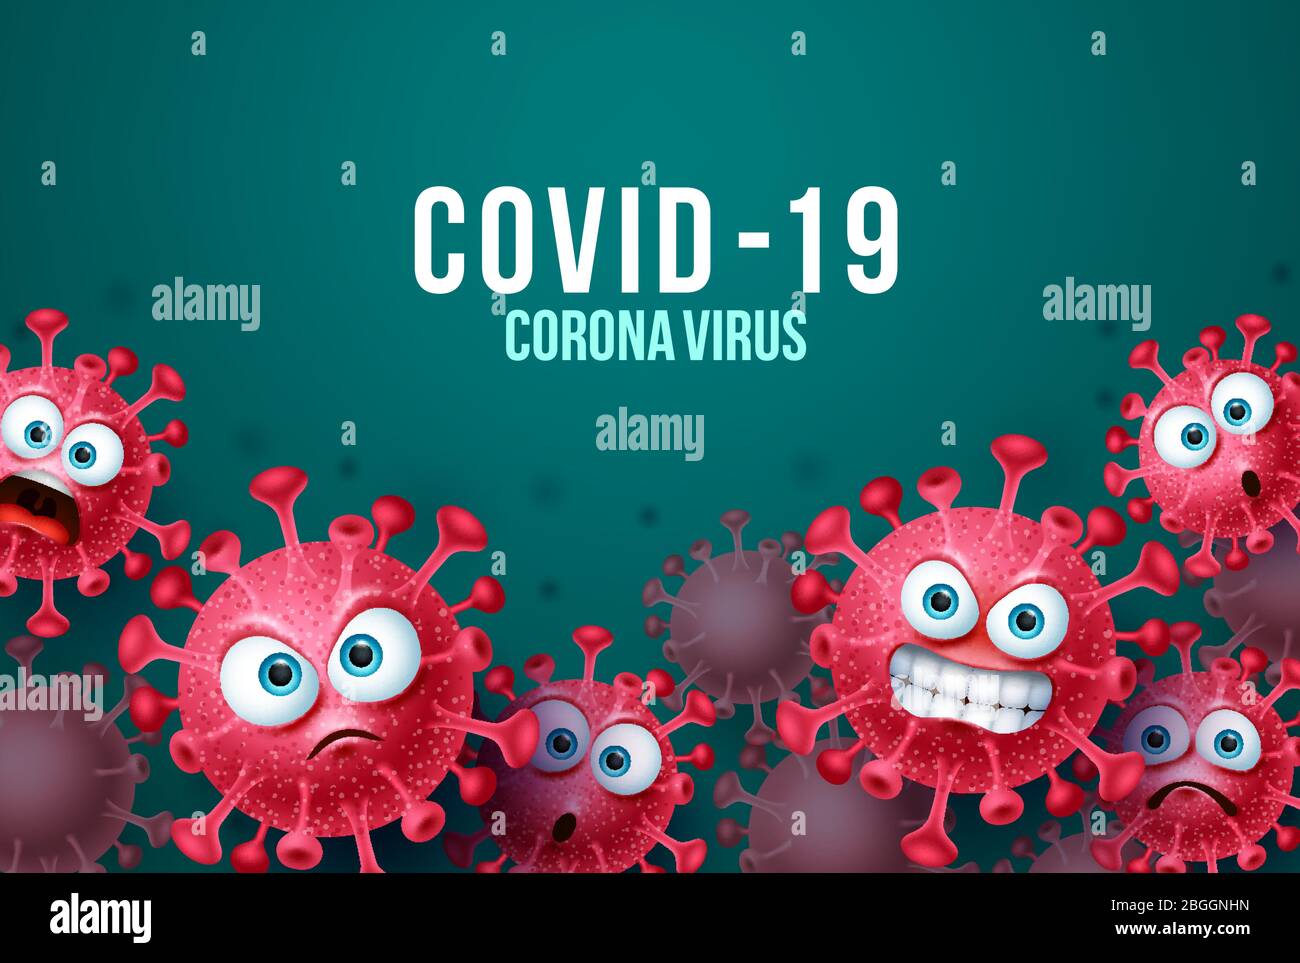 Covid-19 corona virus vector background template. Corona virus background with angry and scary covid-19 emoticons and emojis in background. Stock Vector